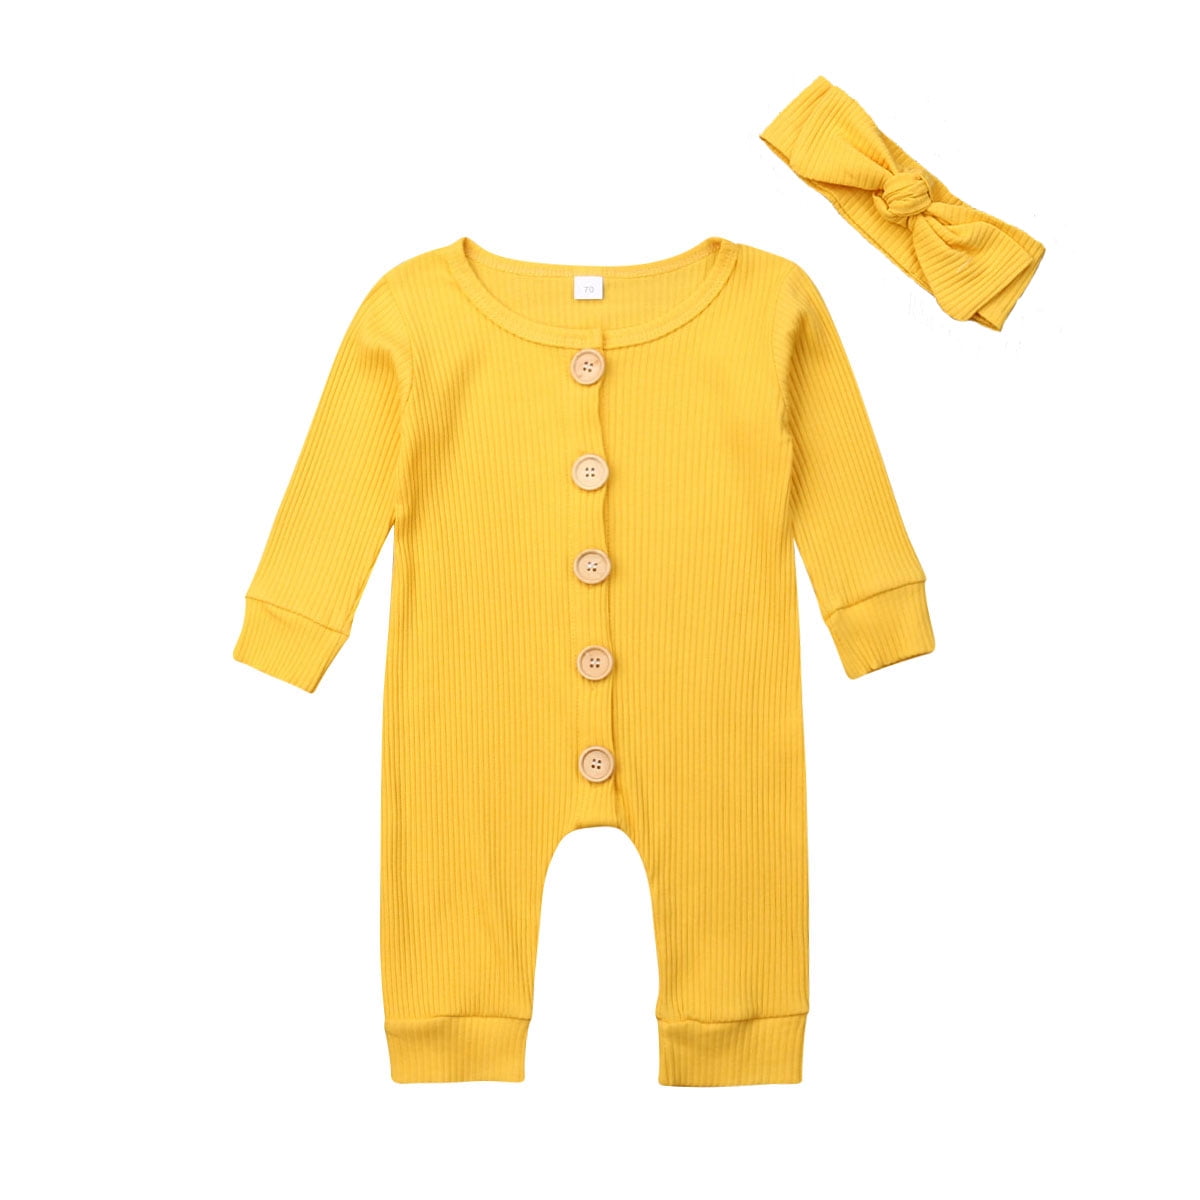 Newborn Baby Boy Girl One Piece Rompers Long Sleeve Organic Rompers Jumpsuits Pajamas Sleeper Overall Toddler Clothes